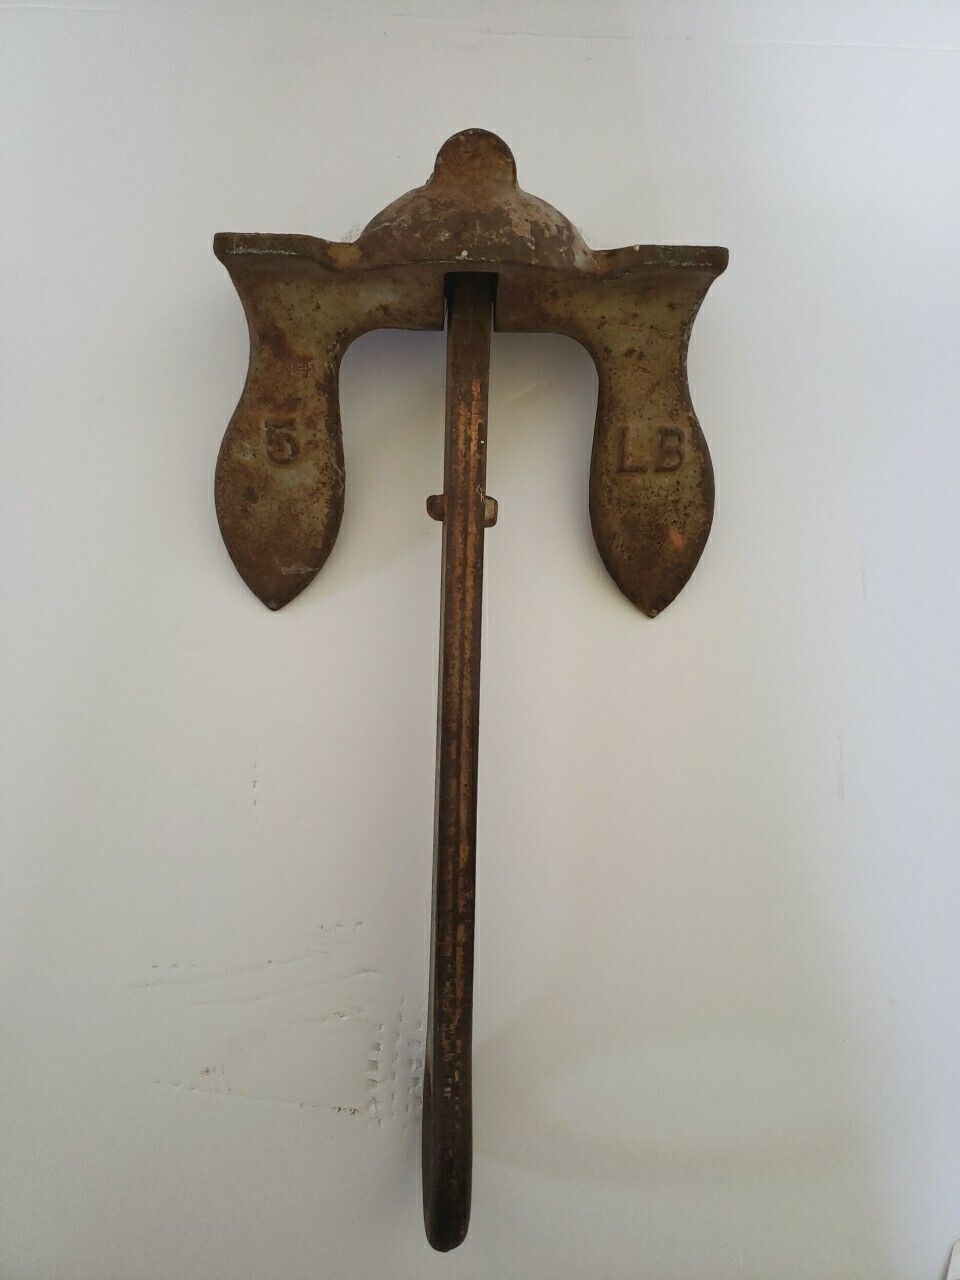 5 lb Cast Iron Boat Anchor Vintage And Fabulously Rusty         